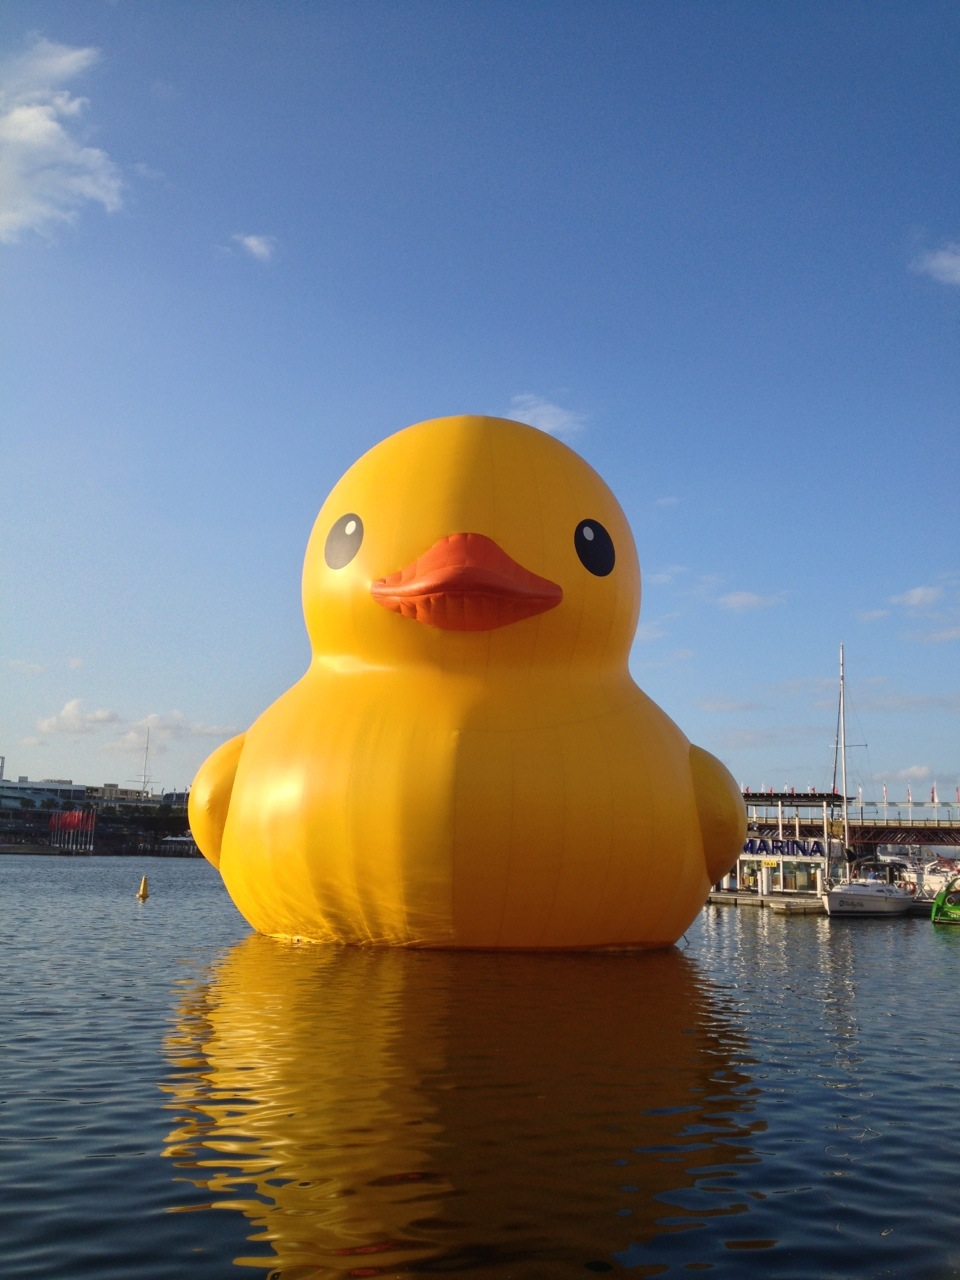 ducky Giant rubber